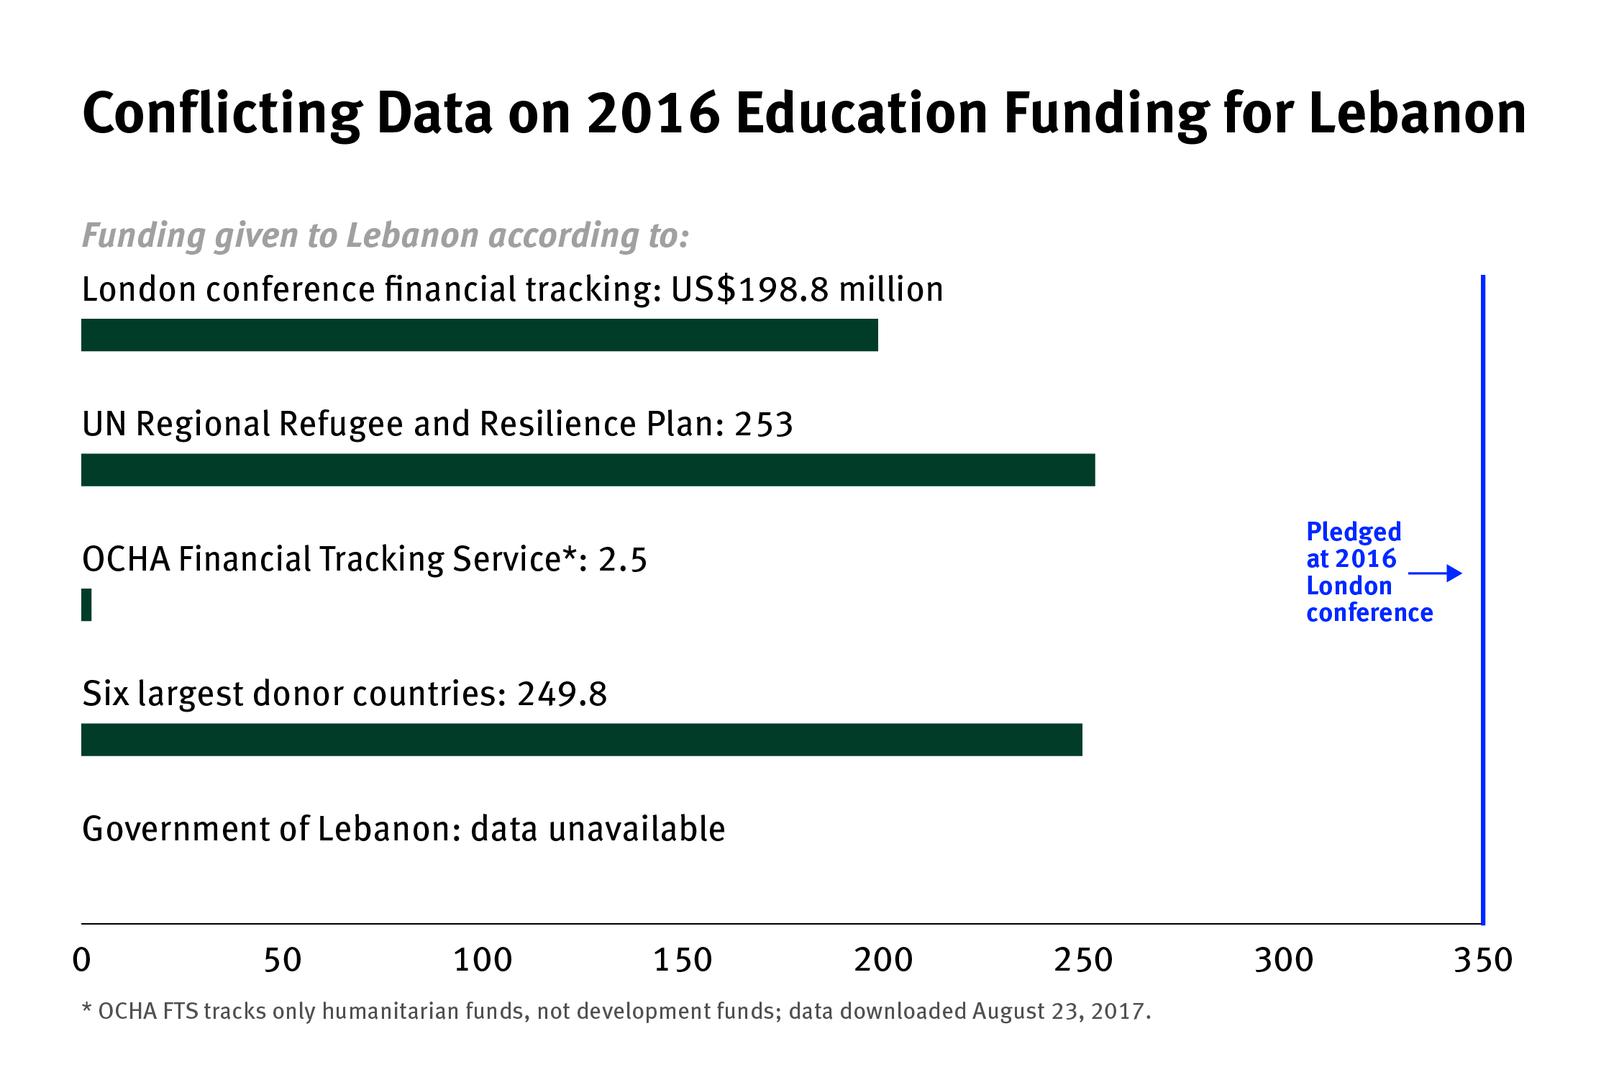 Conflicting data on 2016 education funding for Lebanon